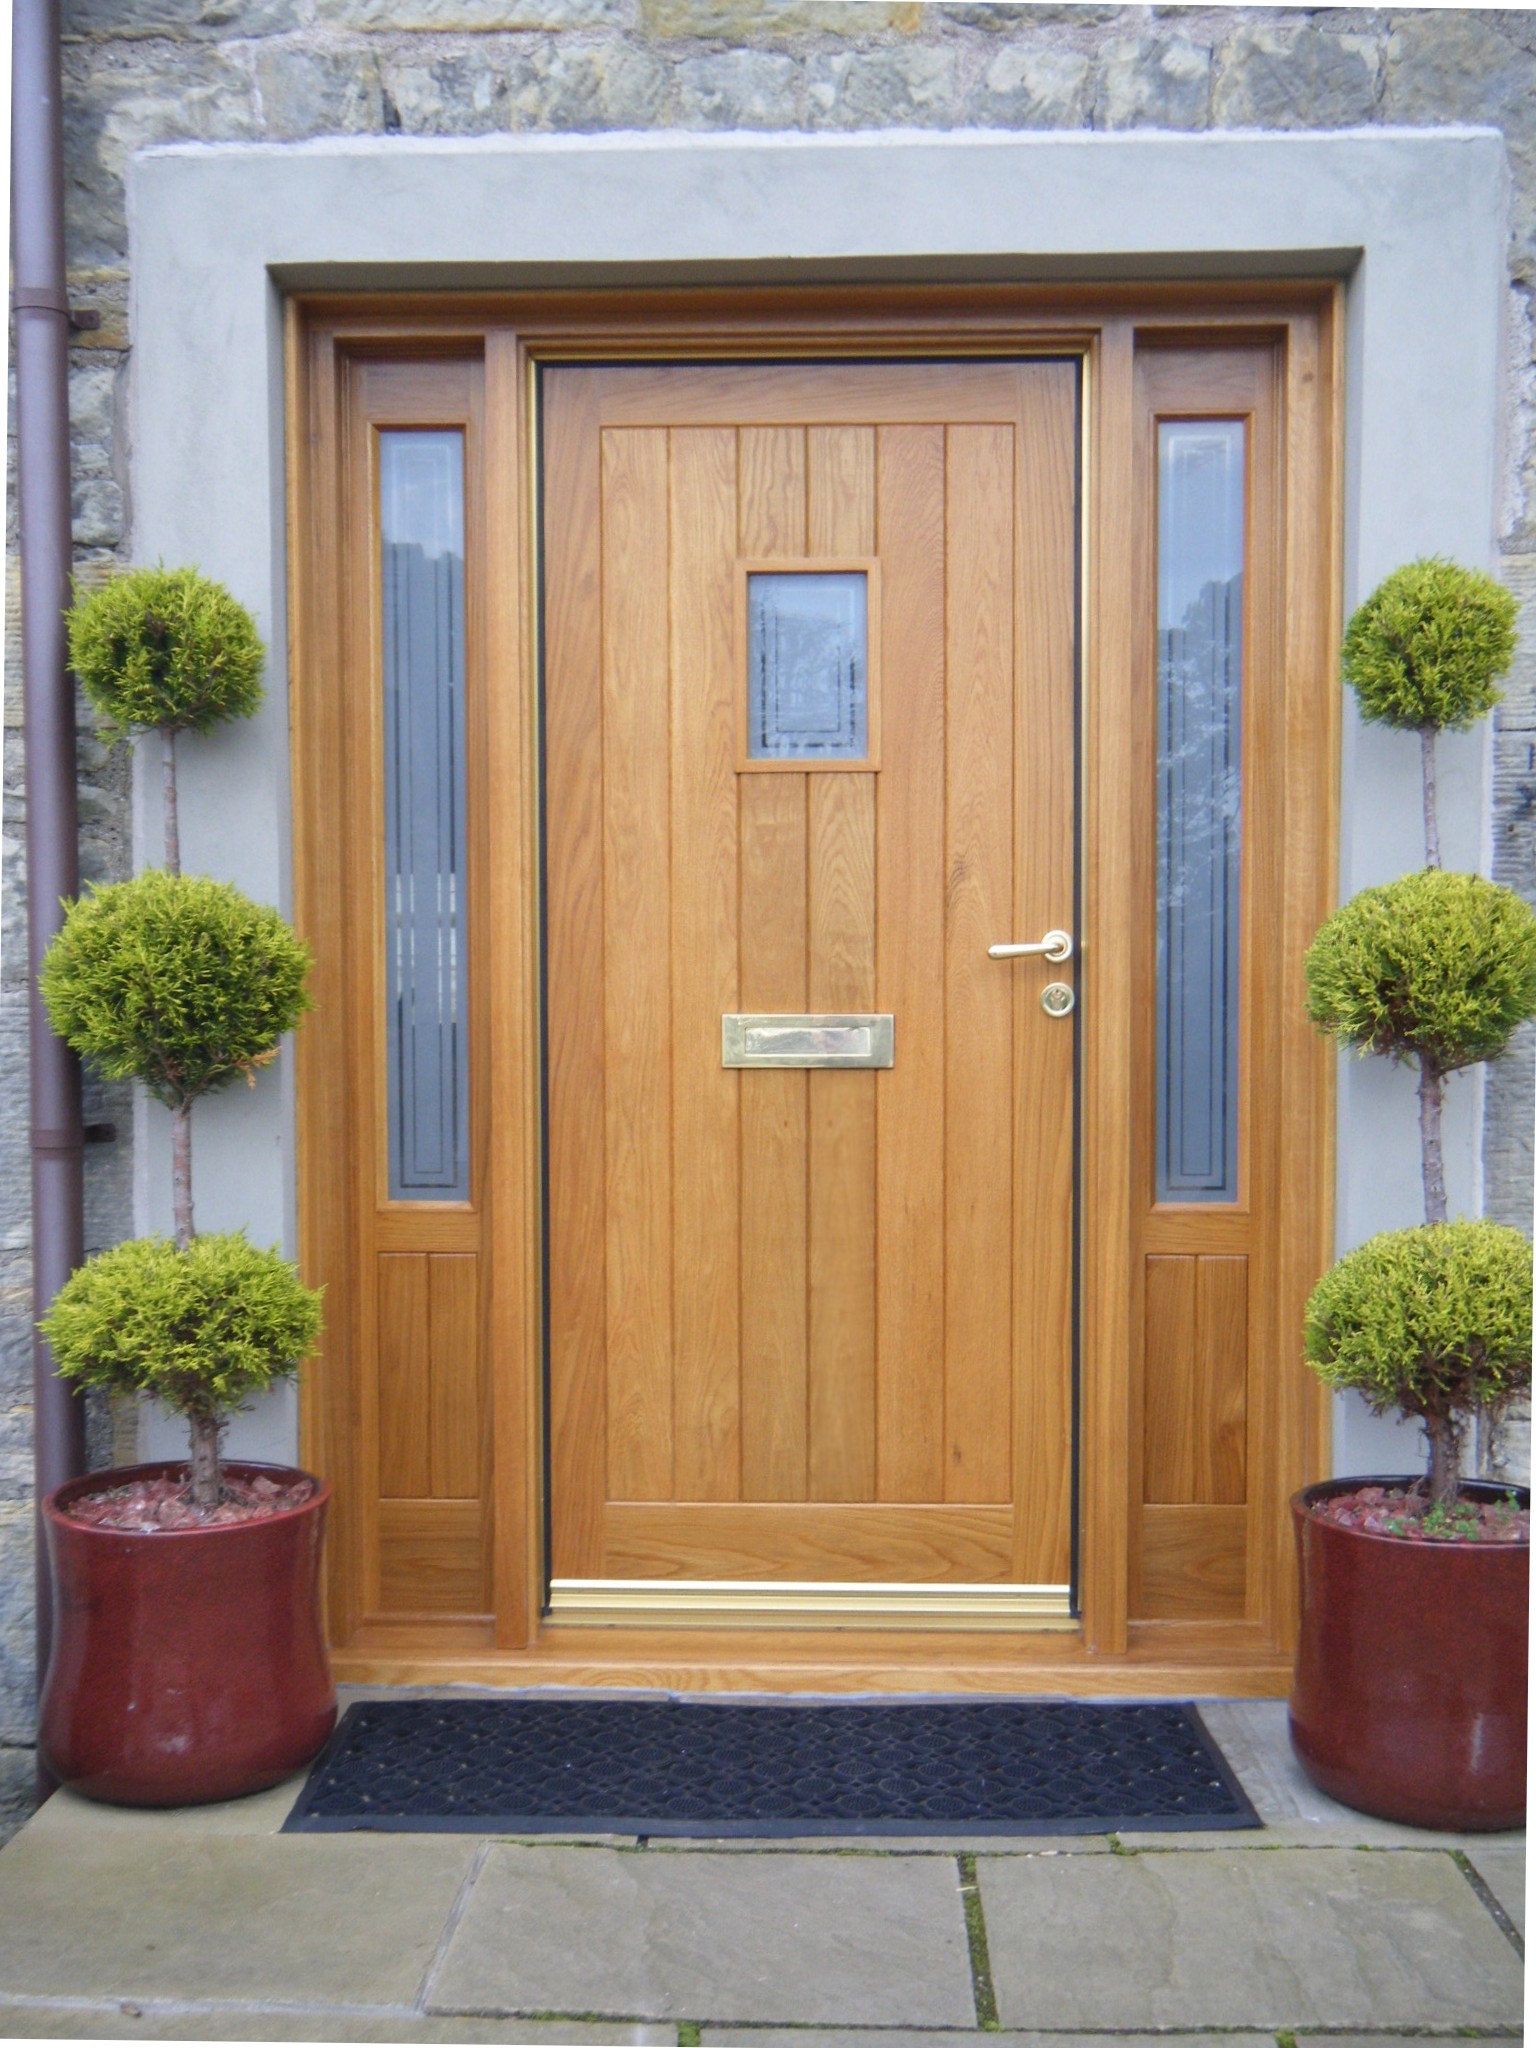 Potted Topiary Large Comely Potted Topiary Mixed With Large Black Doormat And Modern Exterior Wood Door Decoration Fascinating Wooden Doors That Work In Every Room